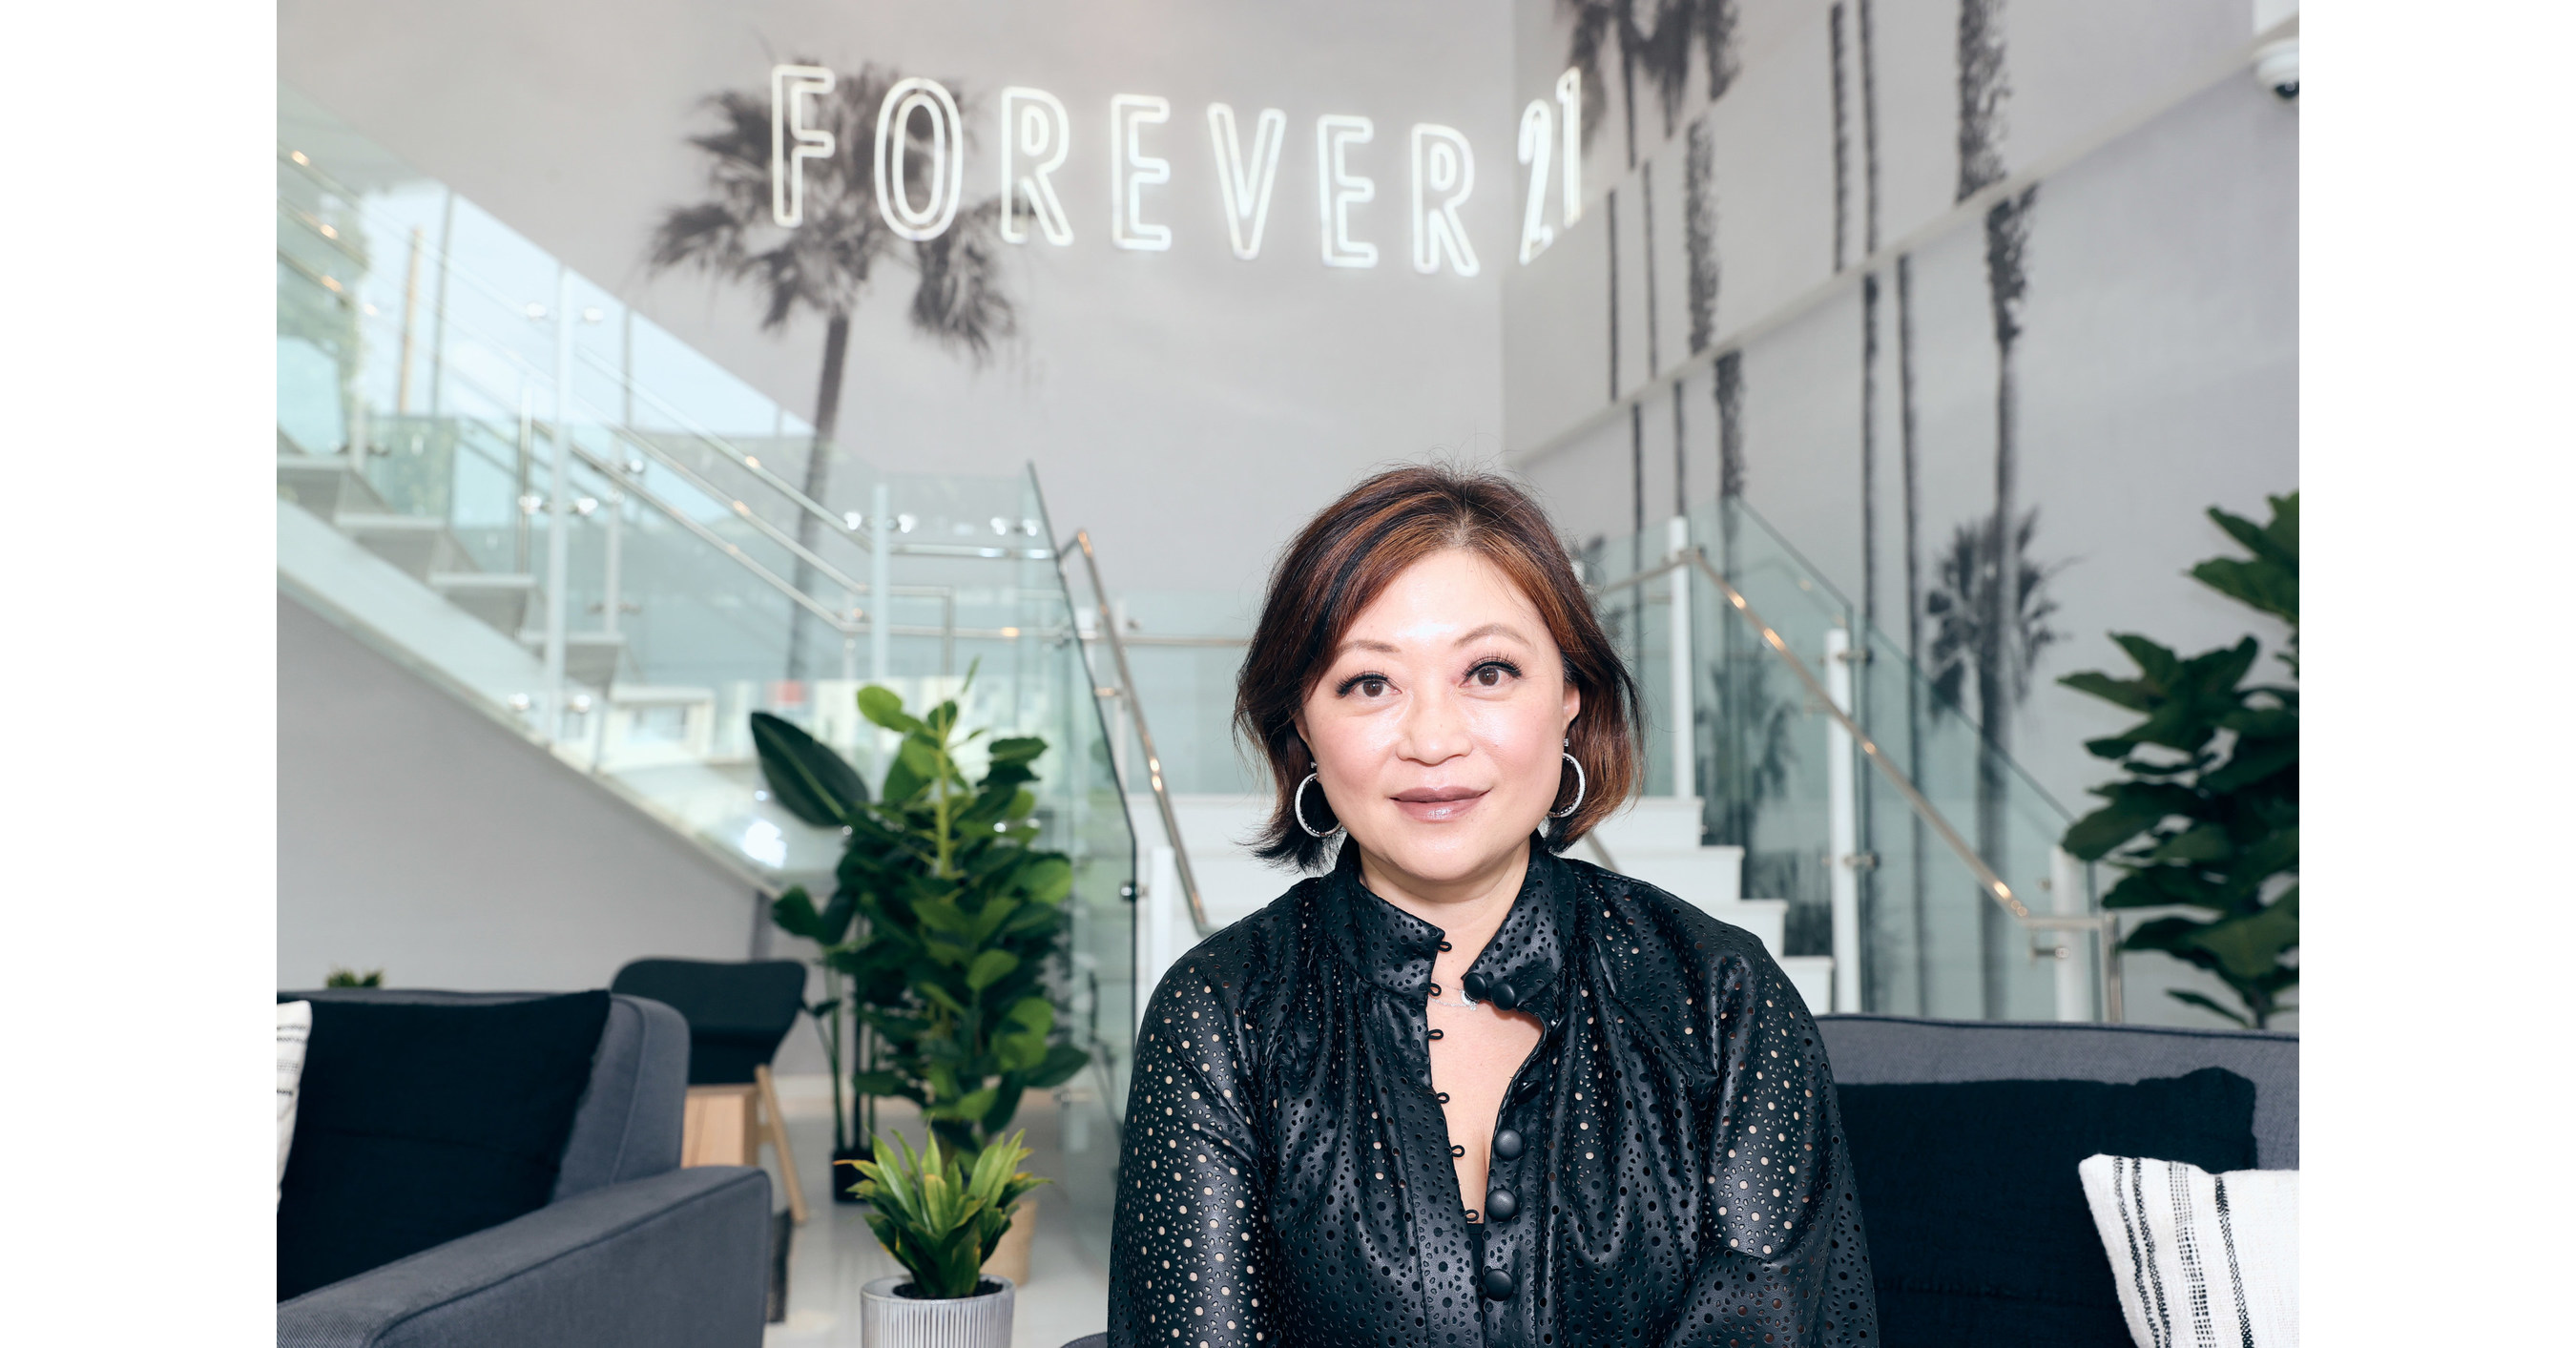 Forever 21's turnaround plan relies on older shoppers returning